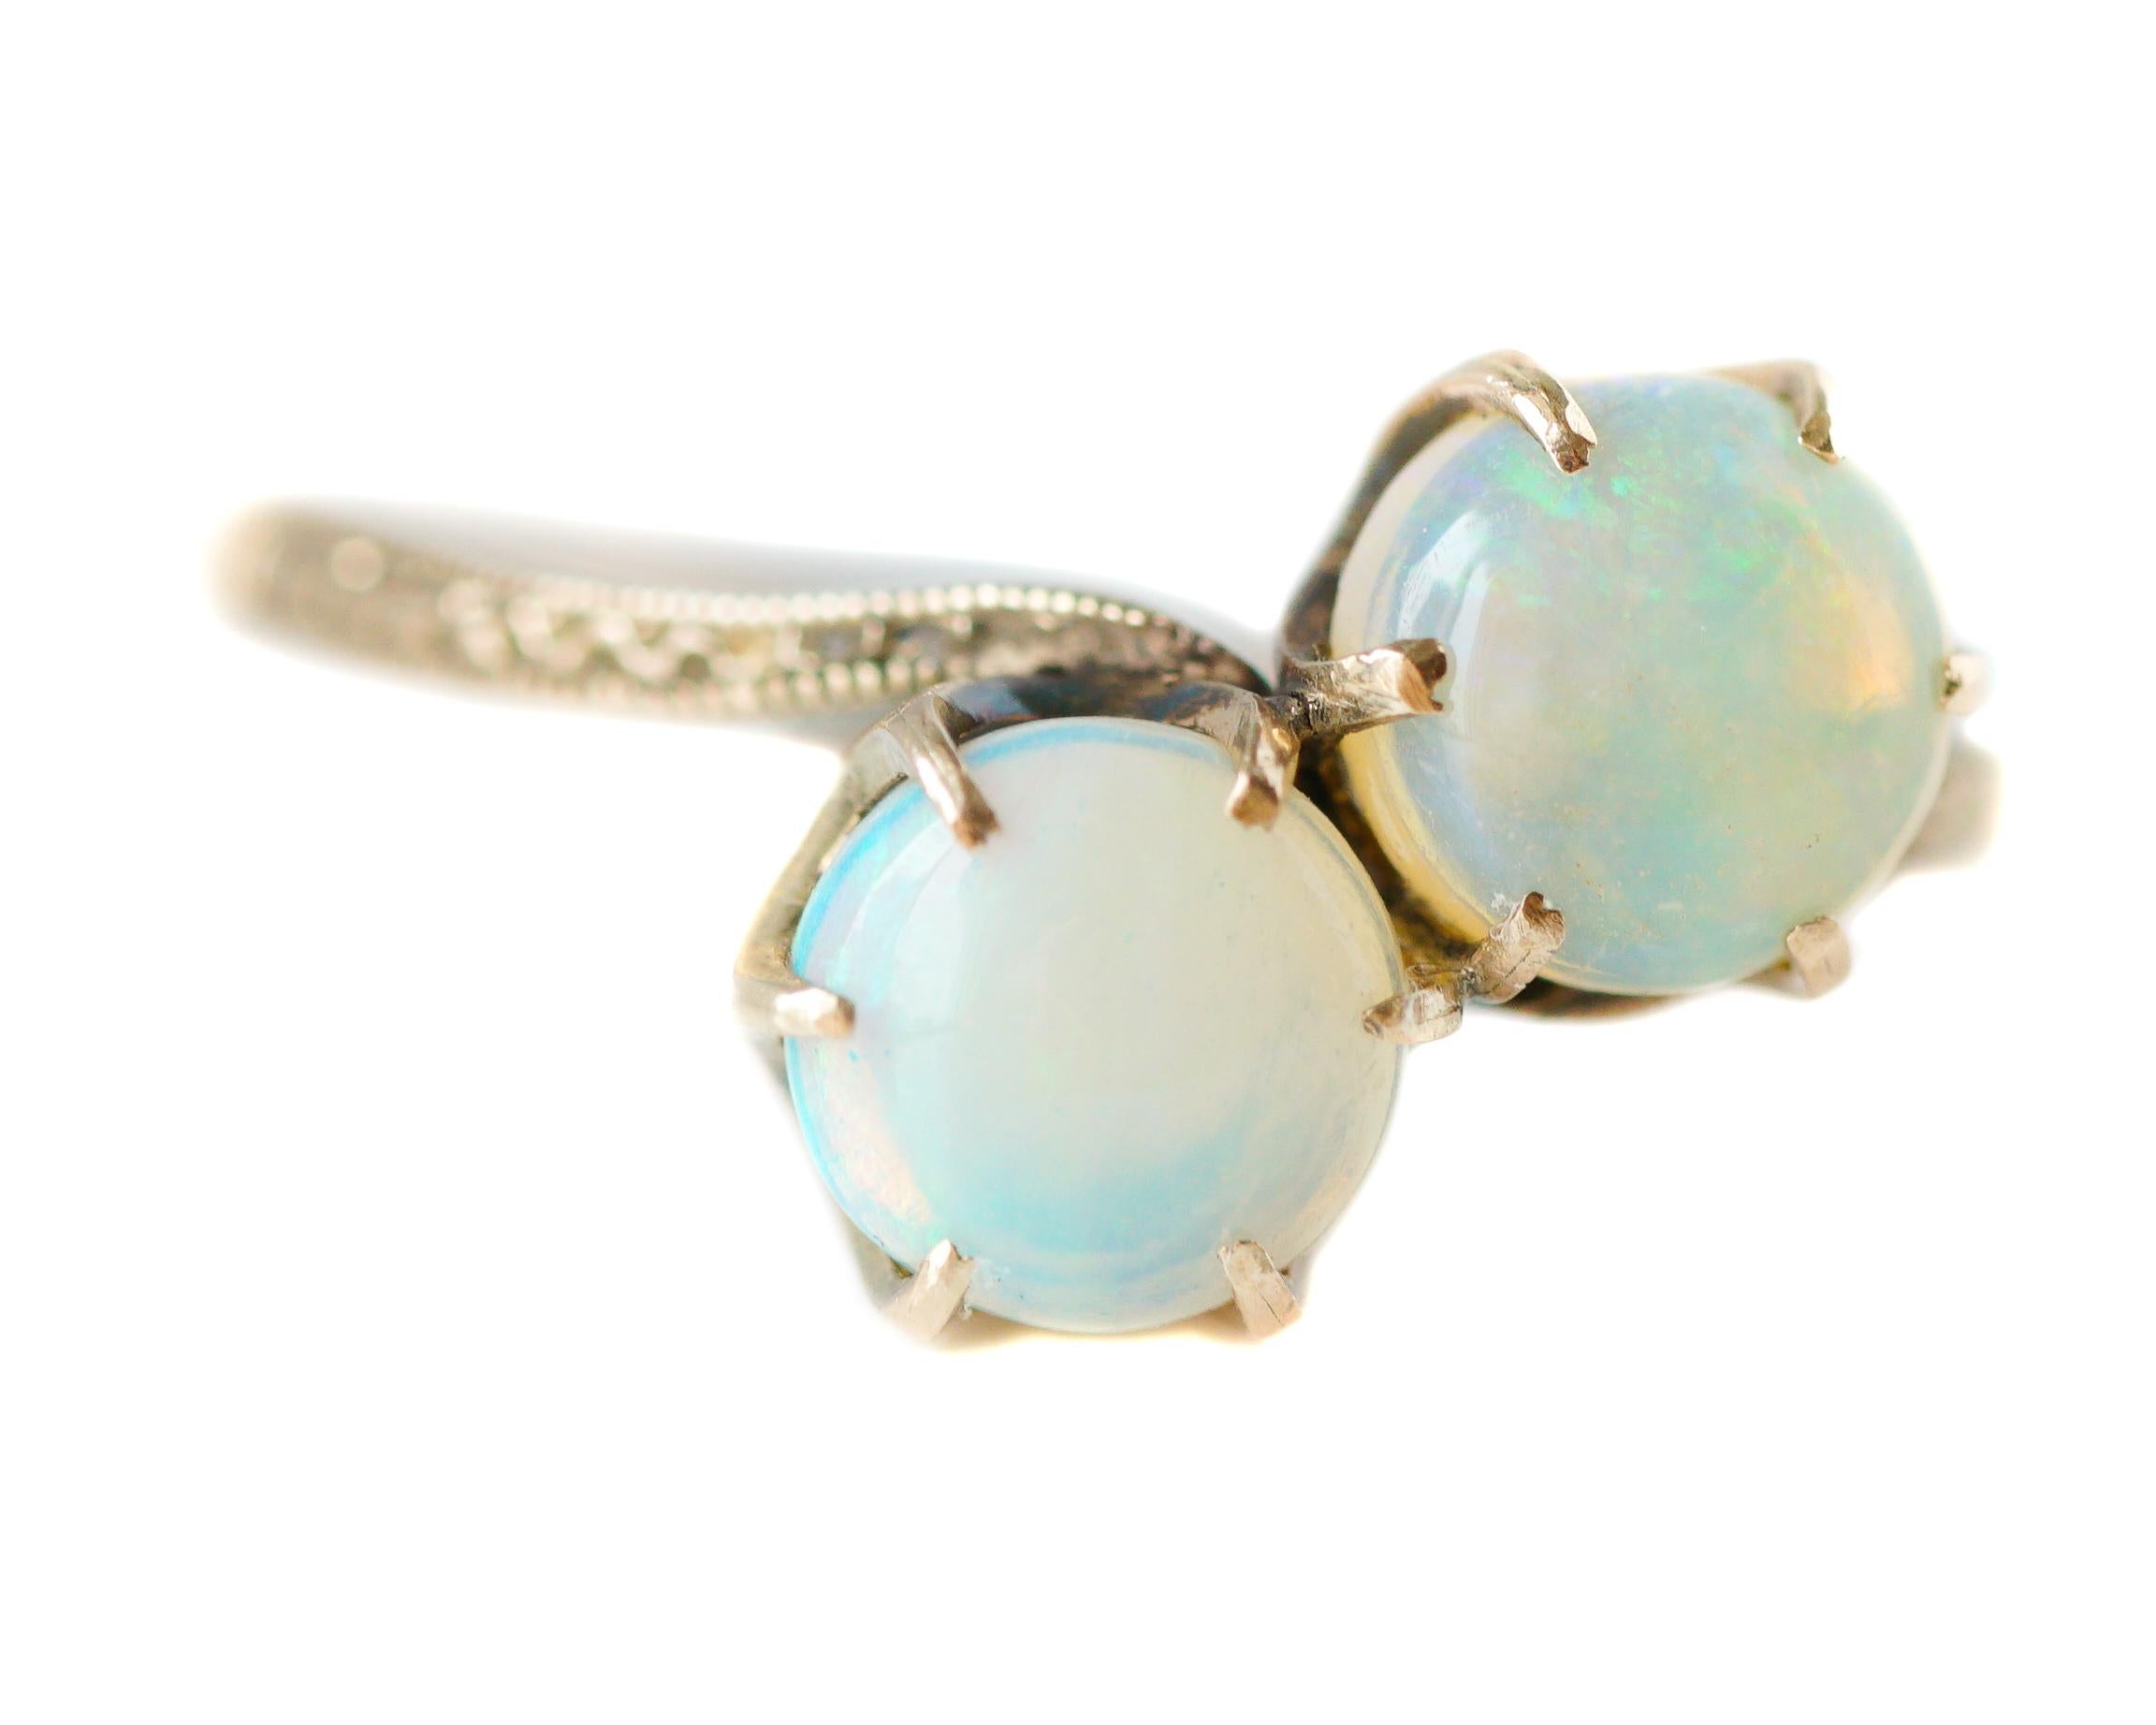 This gorgeous Opal Ring features a delicate bypass setting. 
The front half of the shank is embellished with an elegant, hand-etched design flanked by migraine detail along the upper and lower edges. The 14 karat Rose Gold beautifully accents the 2